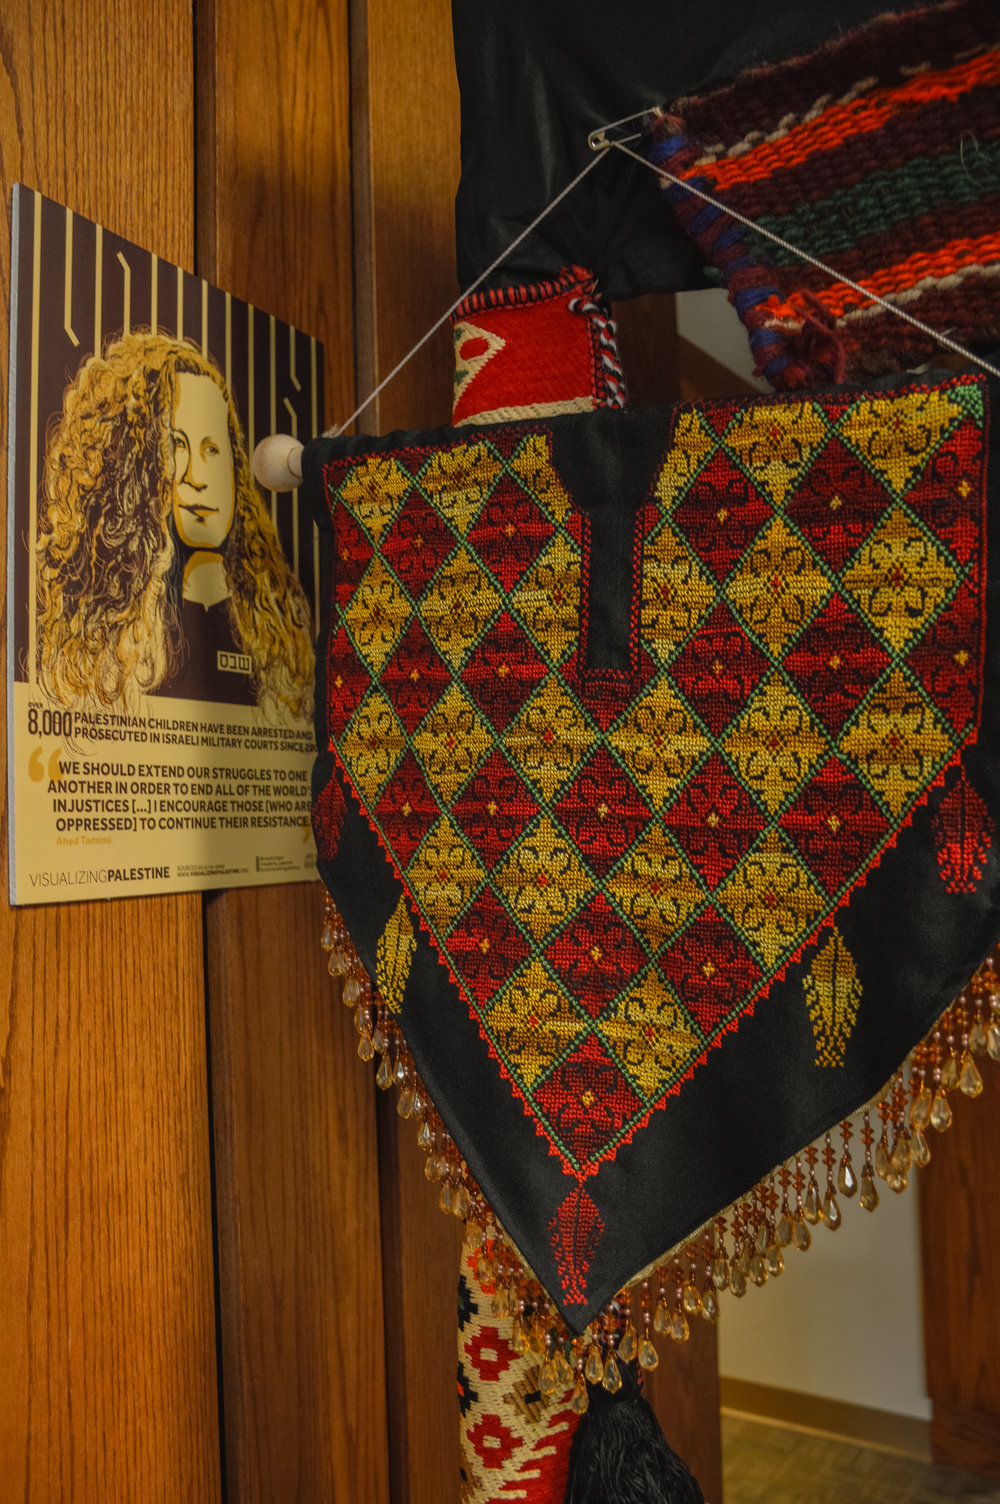  Artifacts on display at Broken Film Festival. Custom textiles/colors and more facts about the occupation in Israel/Palestine 